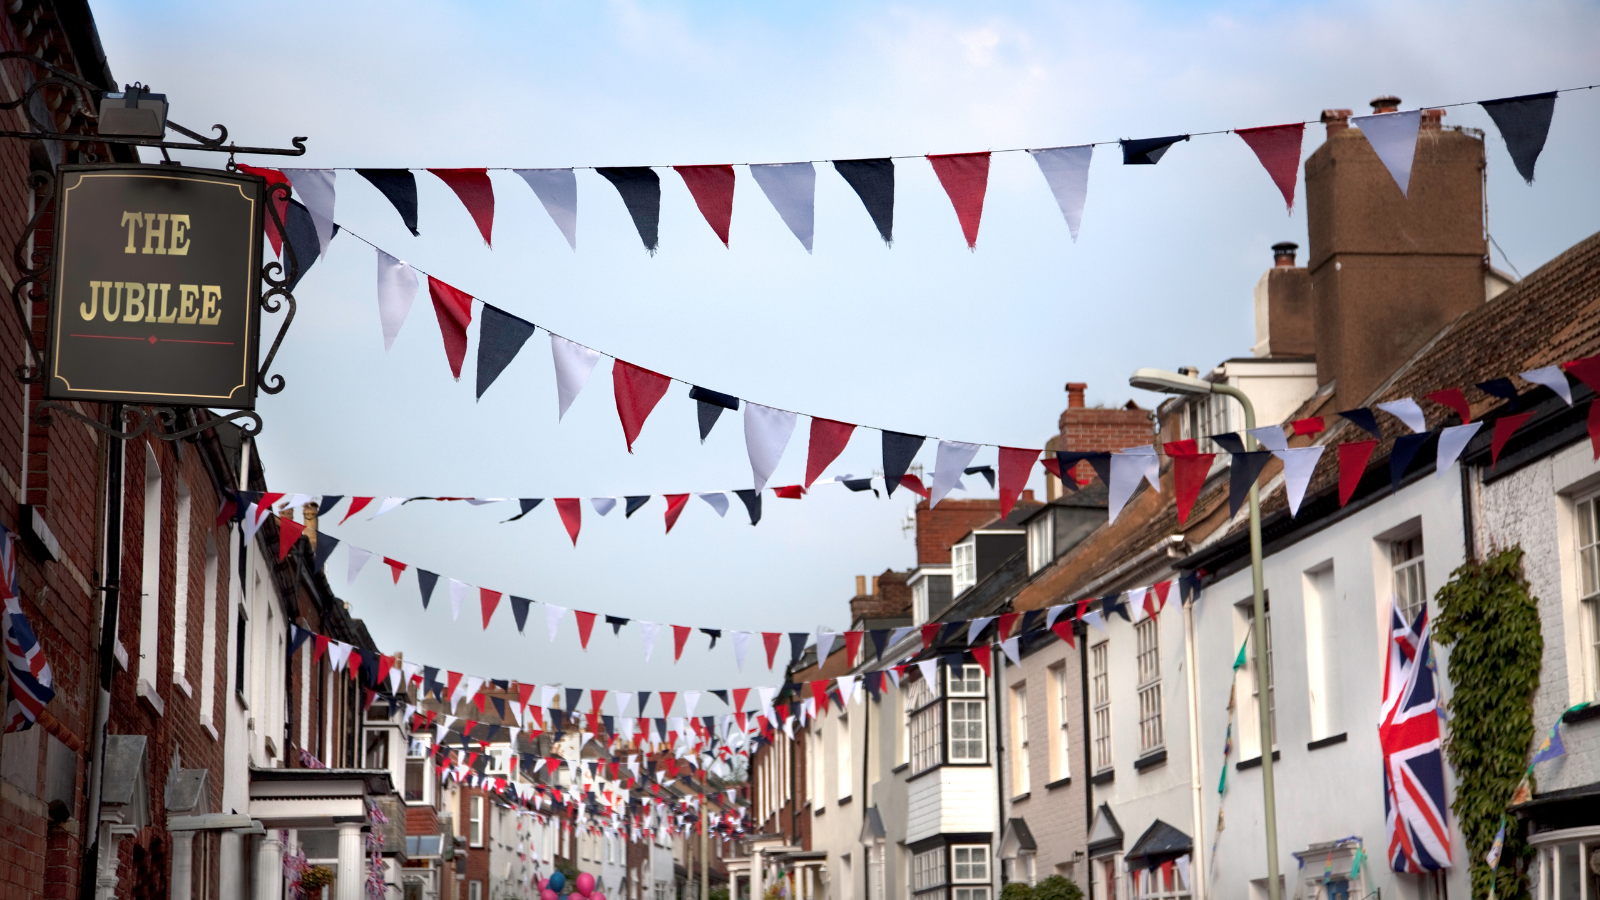 Street with red, white and blue bunting and sign for ‘The Jubilee’